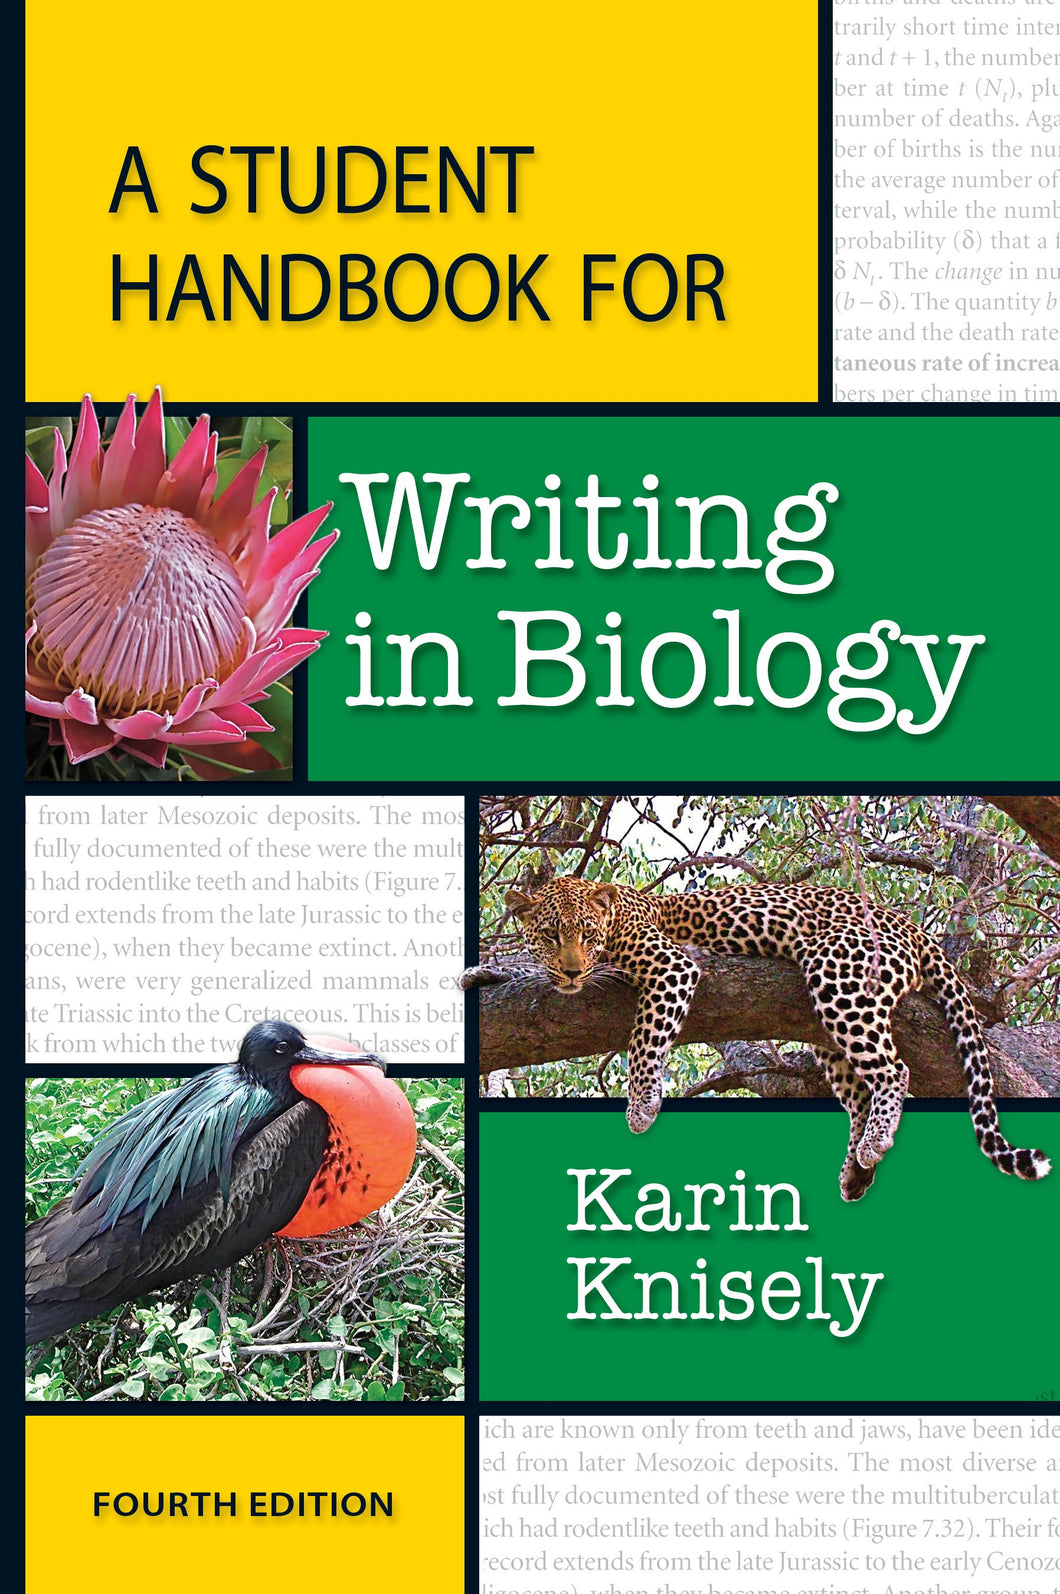 Student Handbook for Writing in Biology, 4th ed.